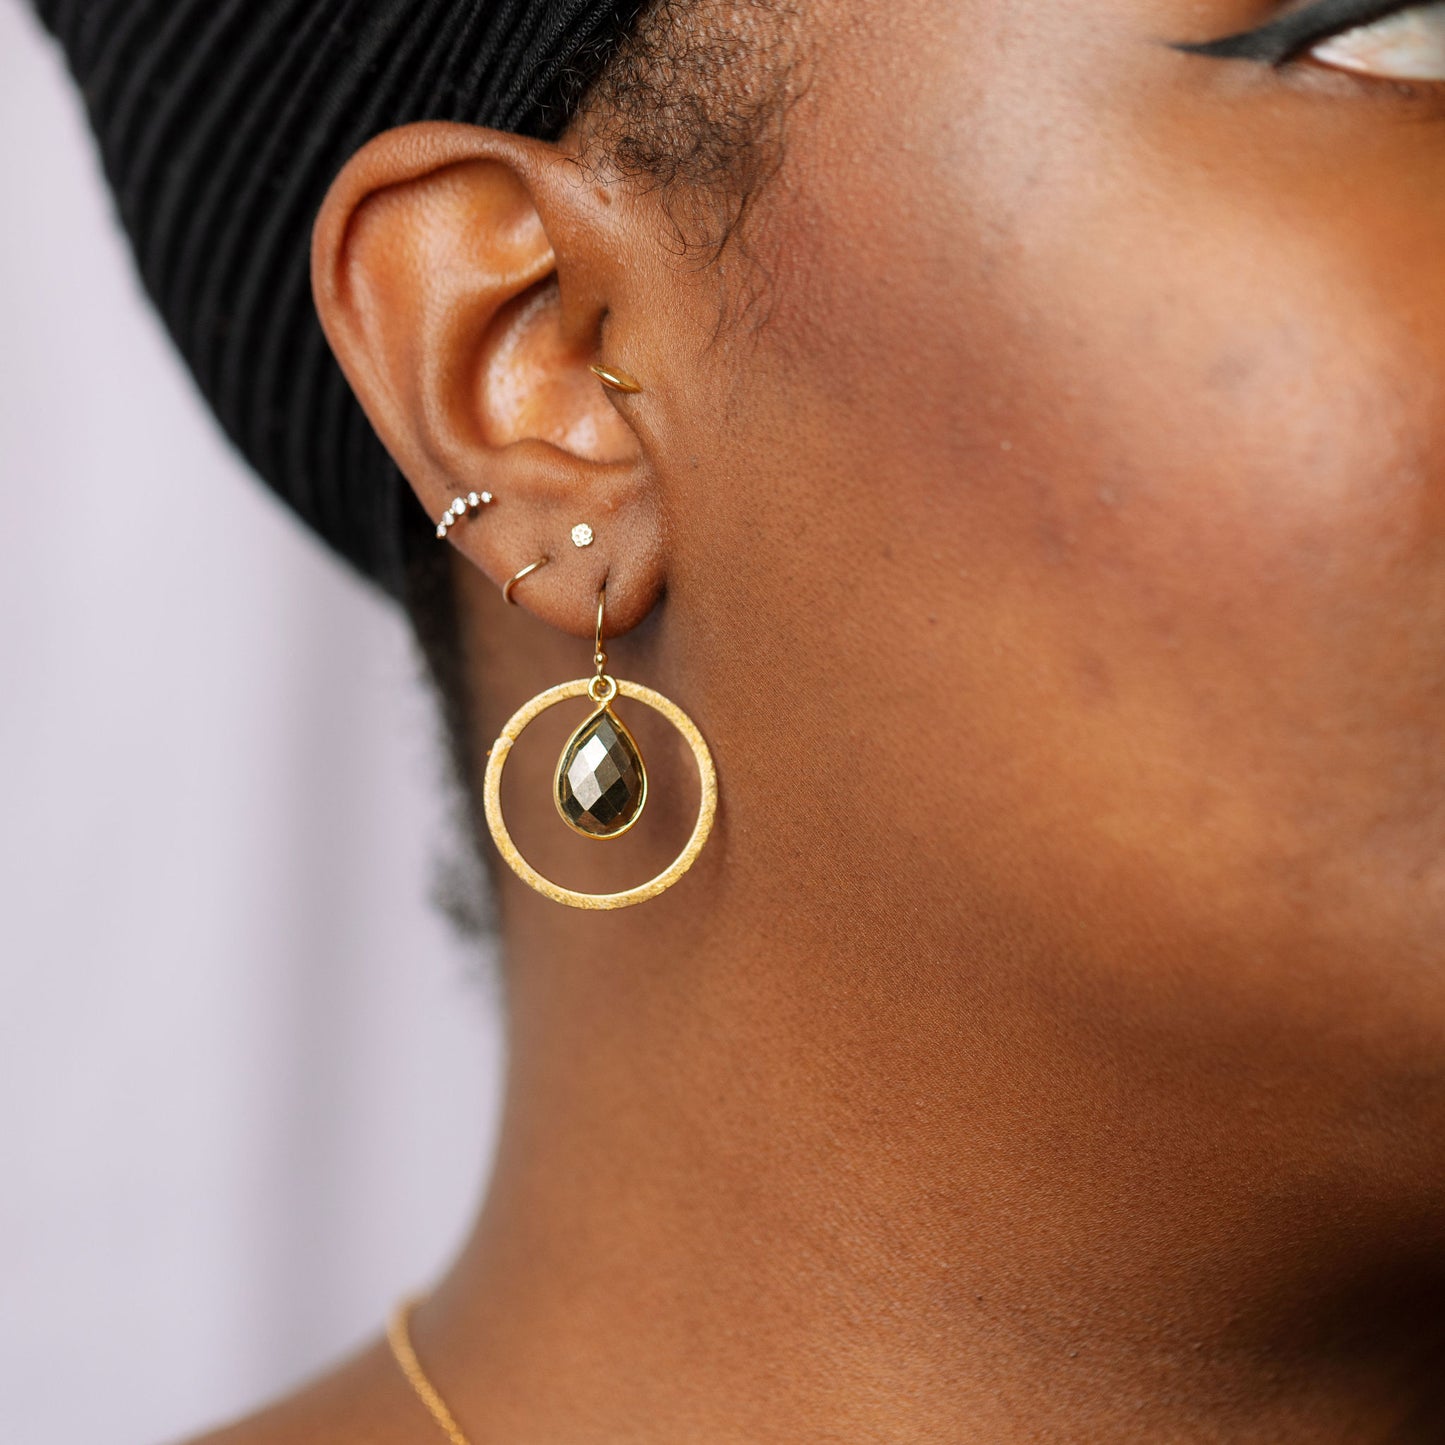 Load image into Gallery viewer, Gold pyrite earrings on model
